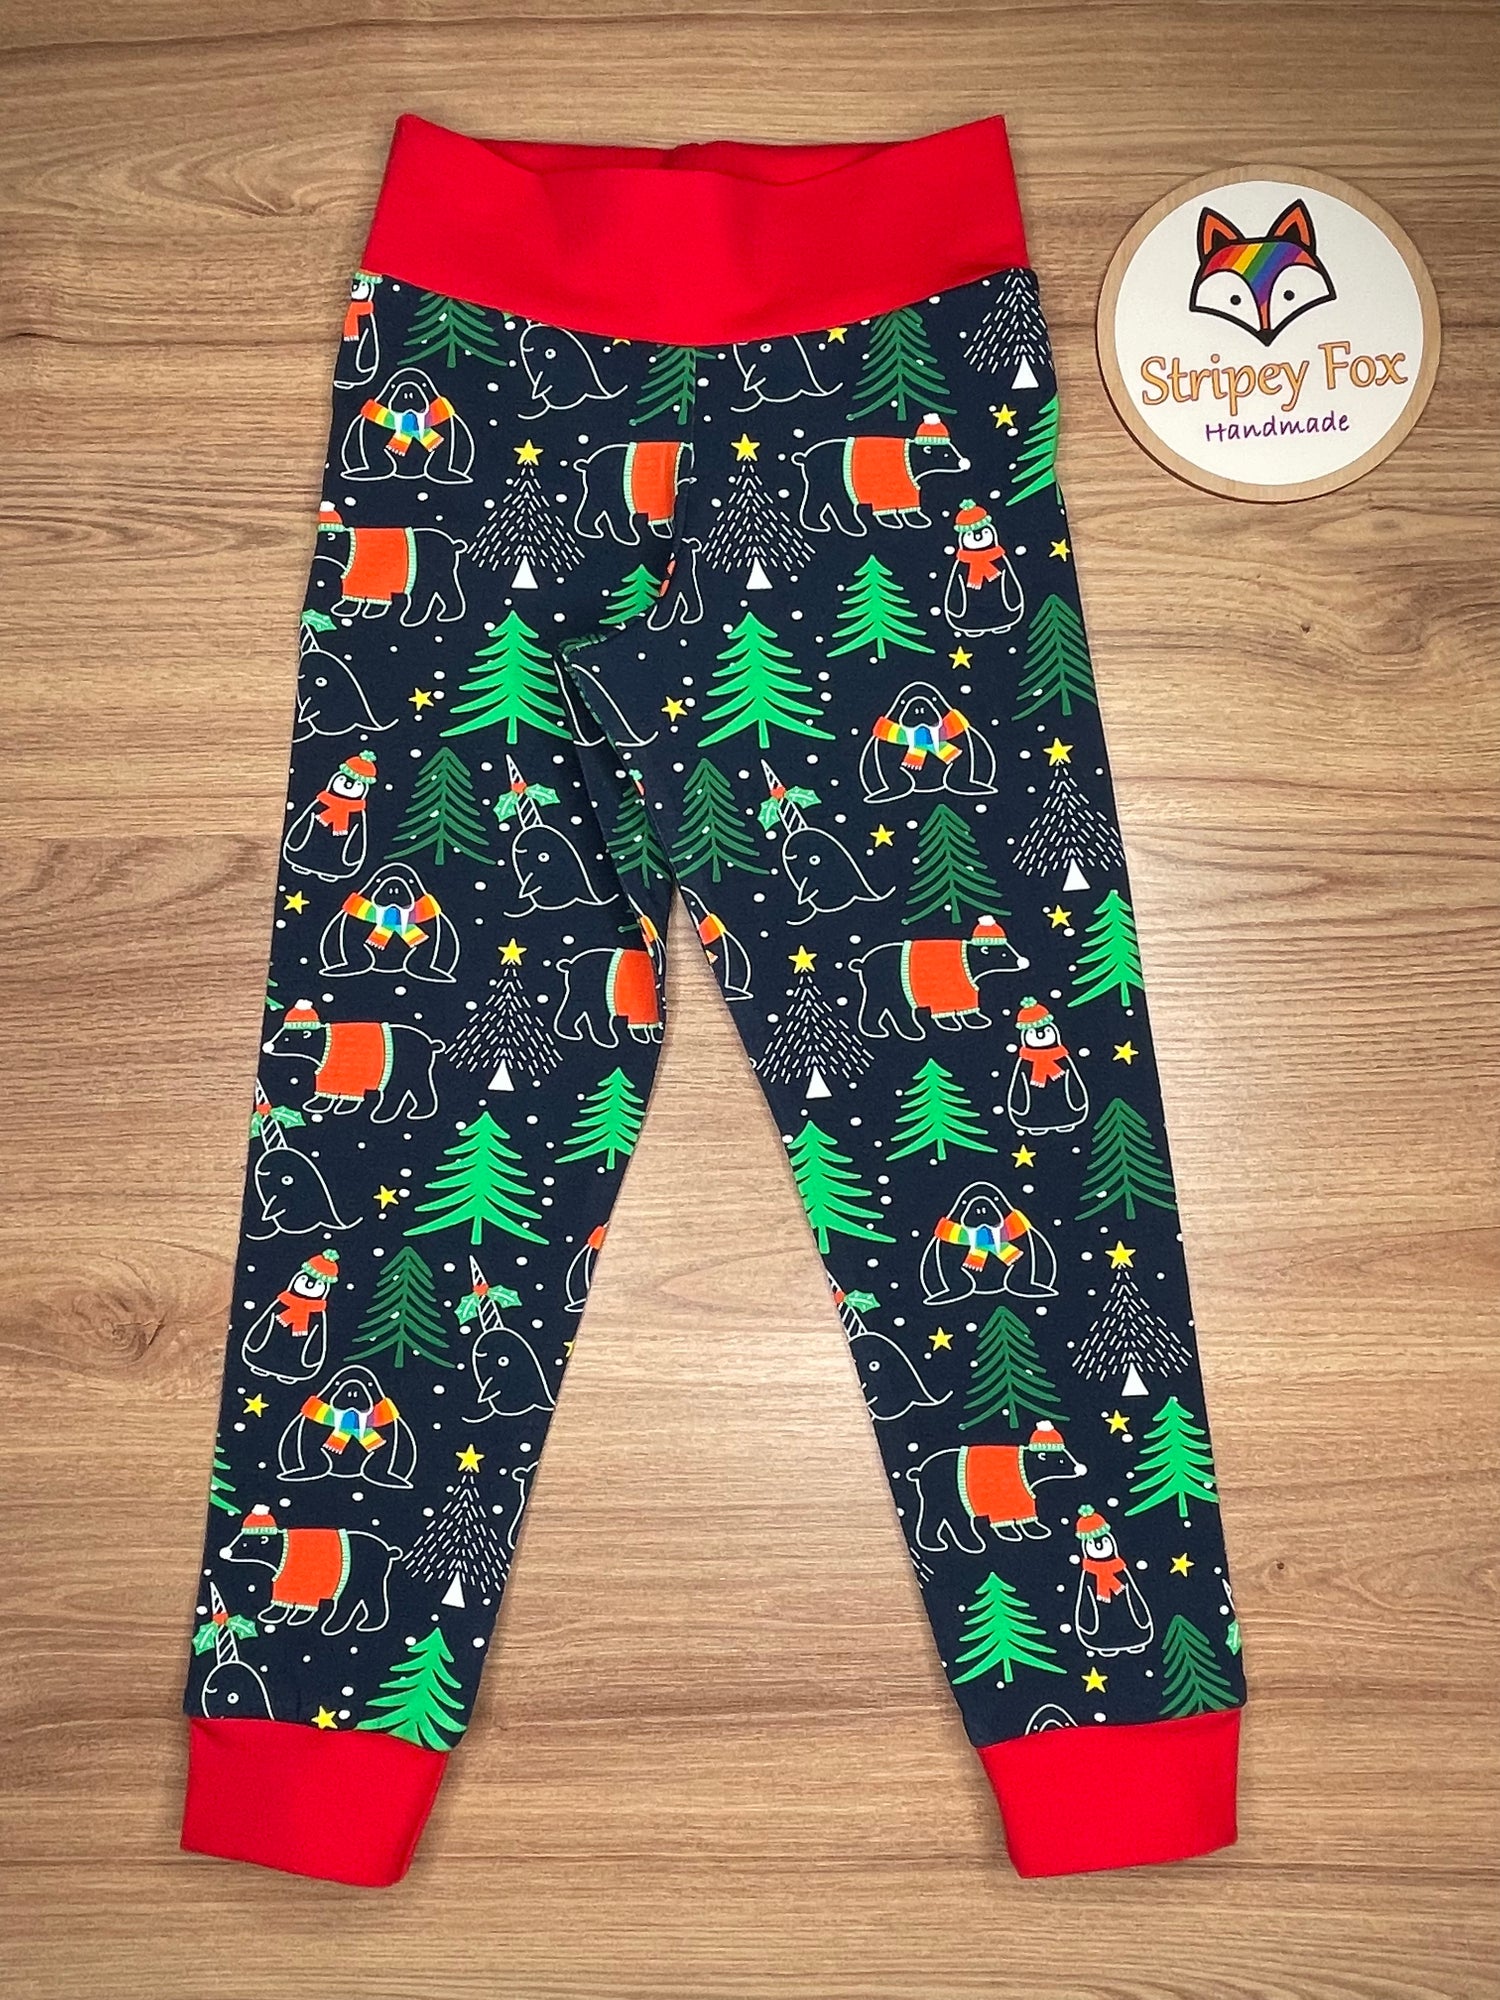 Handmade Baby and Childrens Relaxed Fit Leggings - Unisex Prints